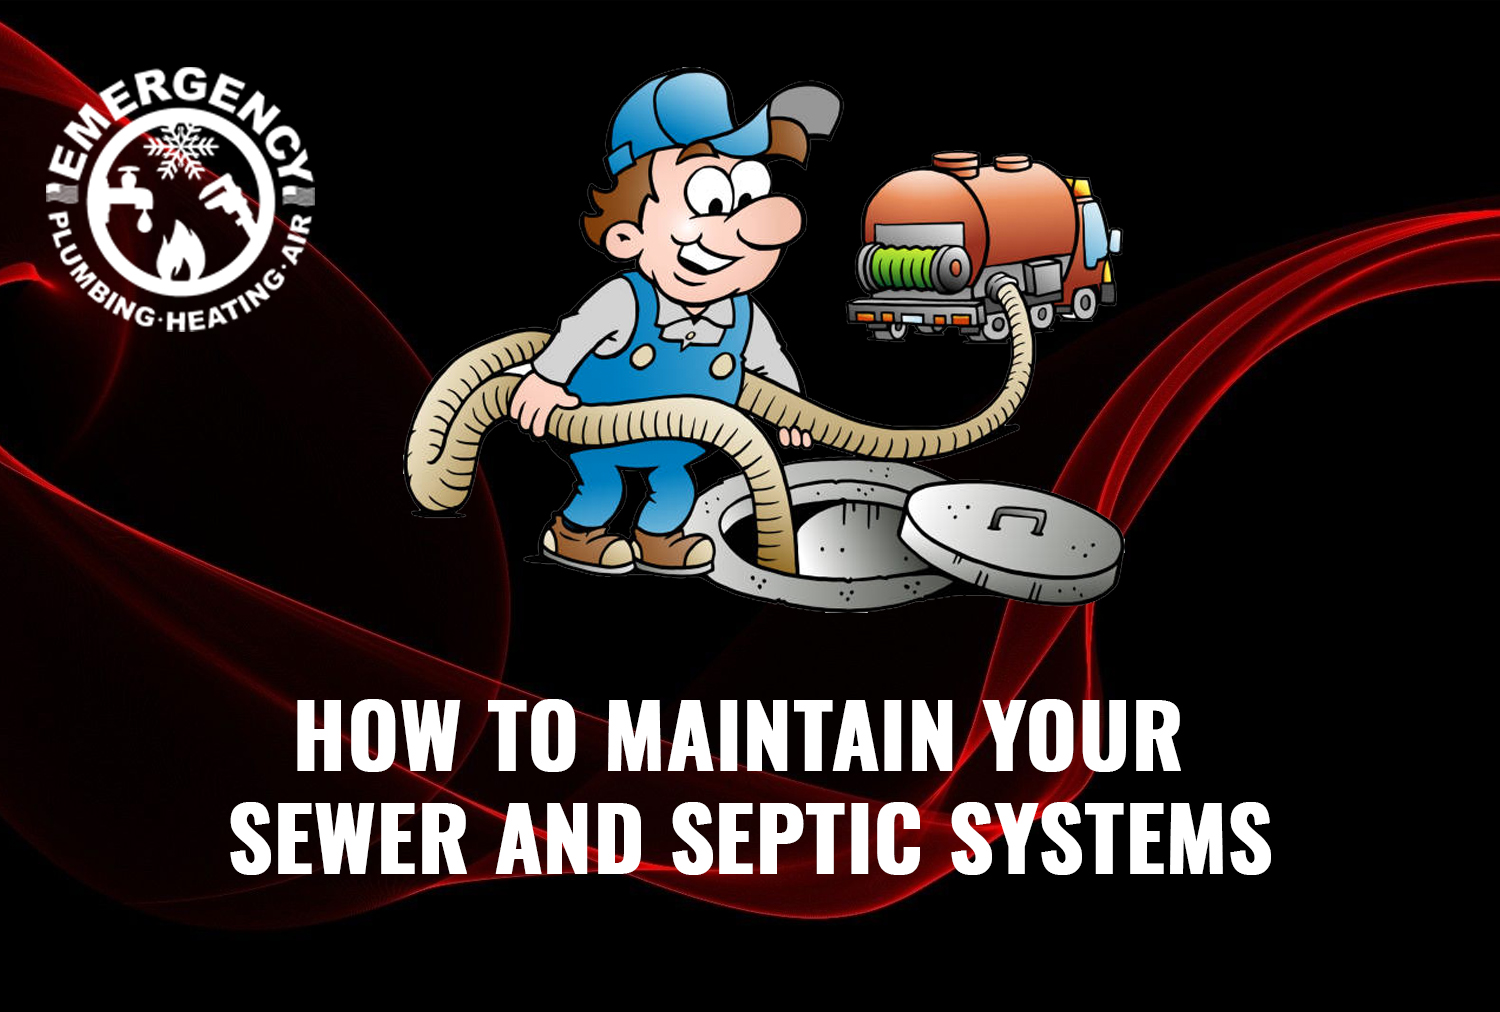 How to Maintain Your Sewer and Septic Systems